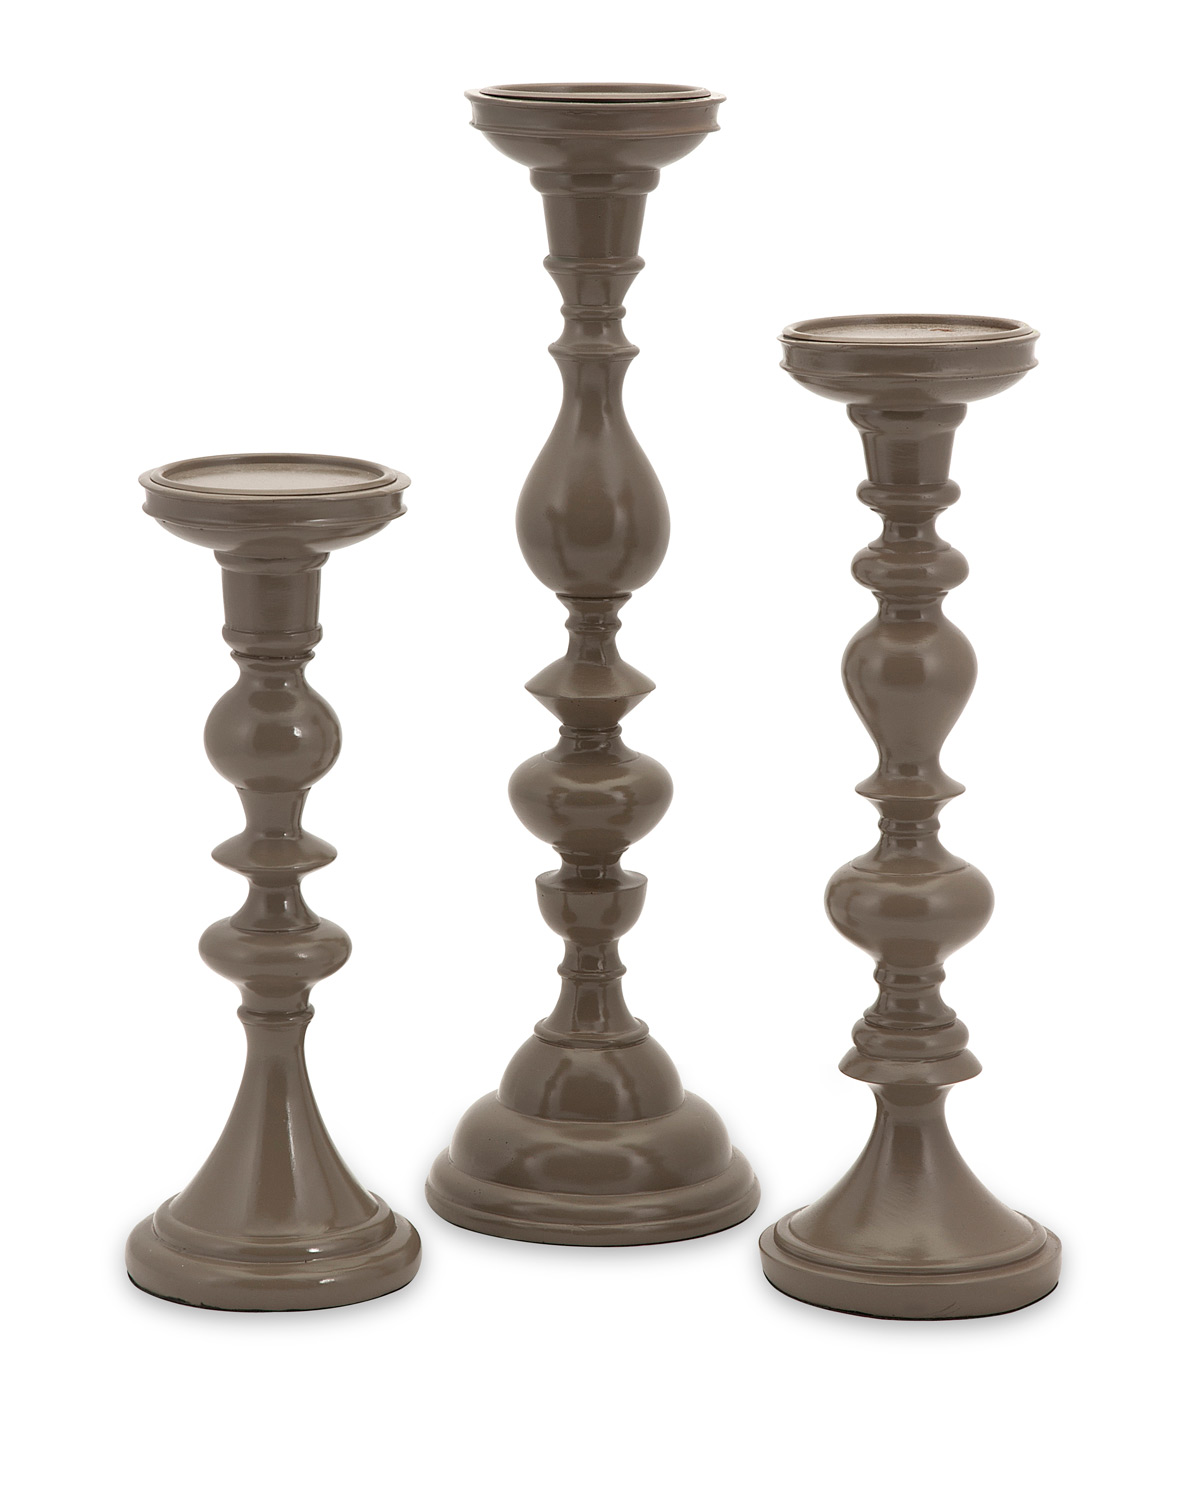 IMAX Essential Taupe Candle Holders - Set of 3